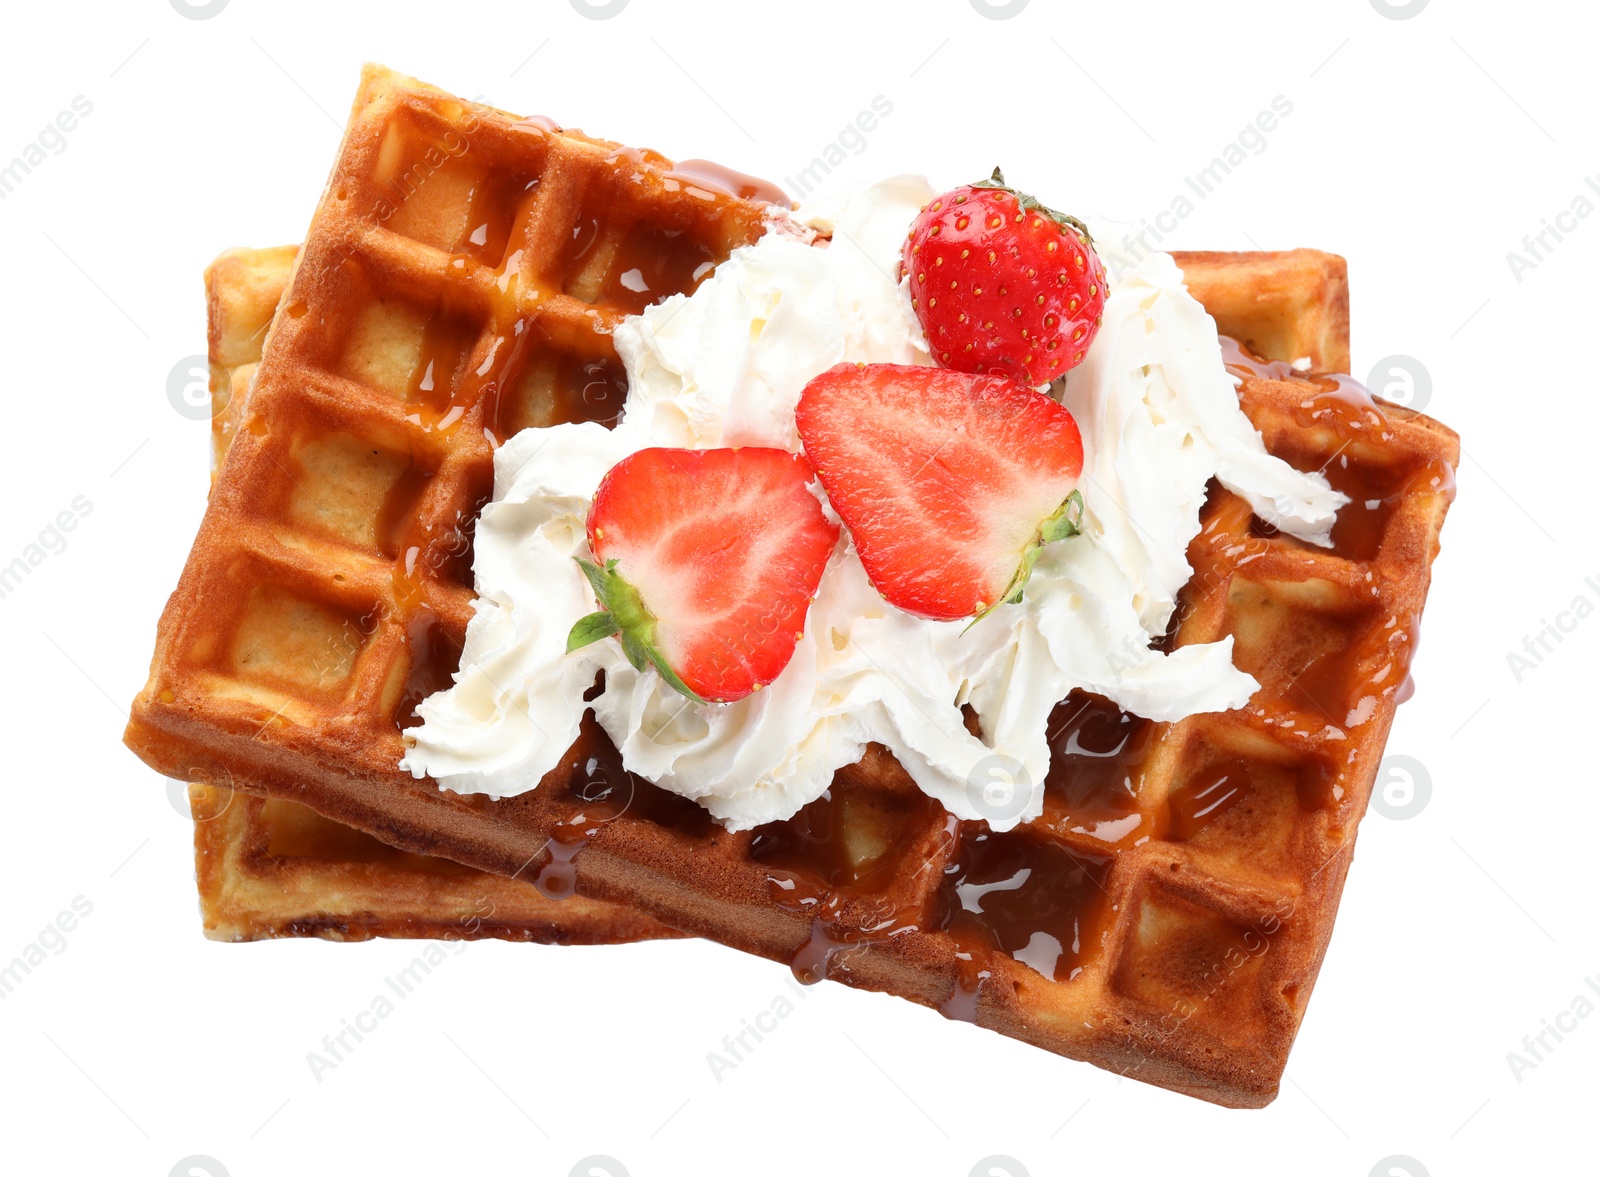 Photo of Delicious Belgian waffles with strawberries, whipped cream and caramel sauce on white background, top view